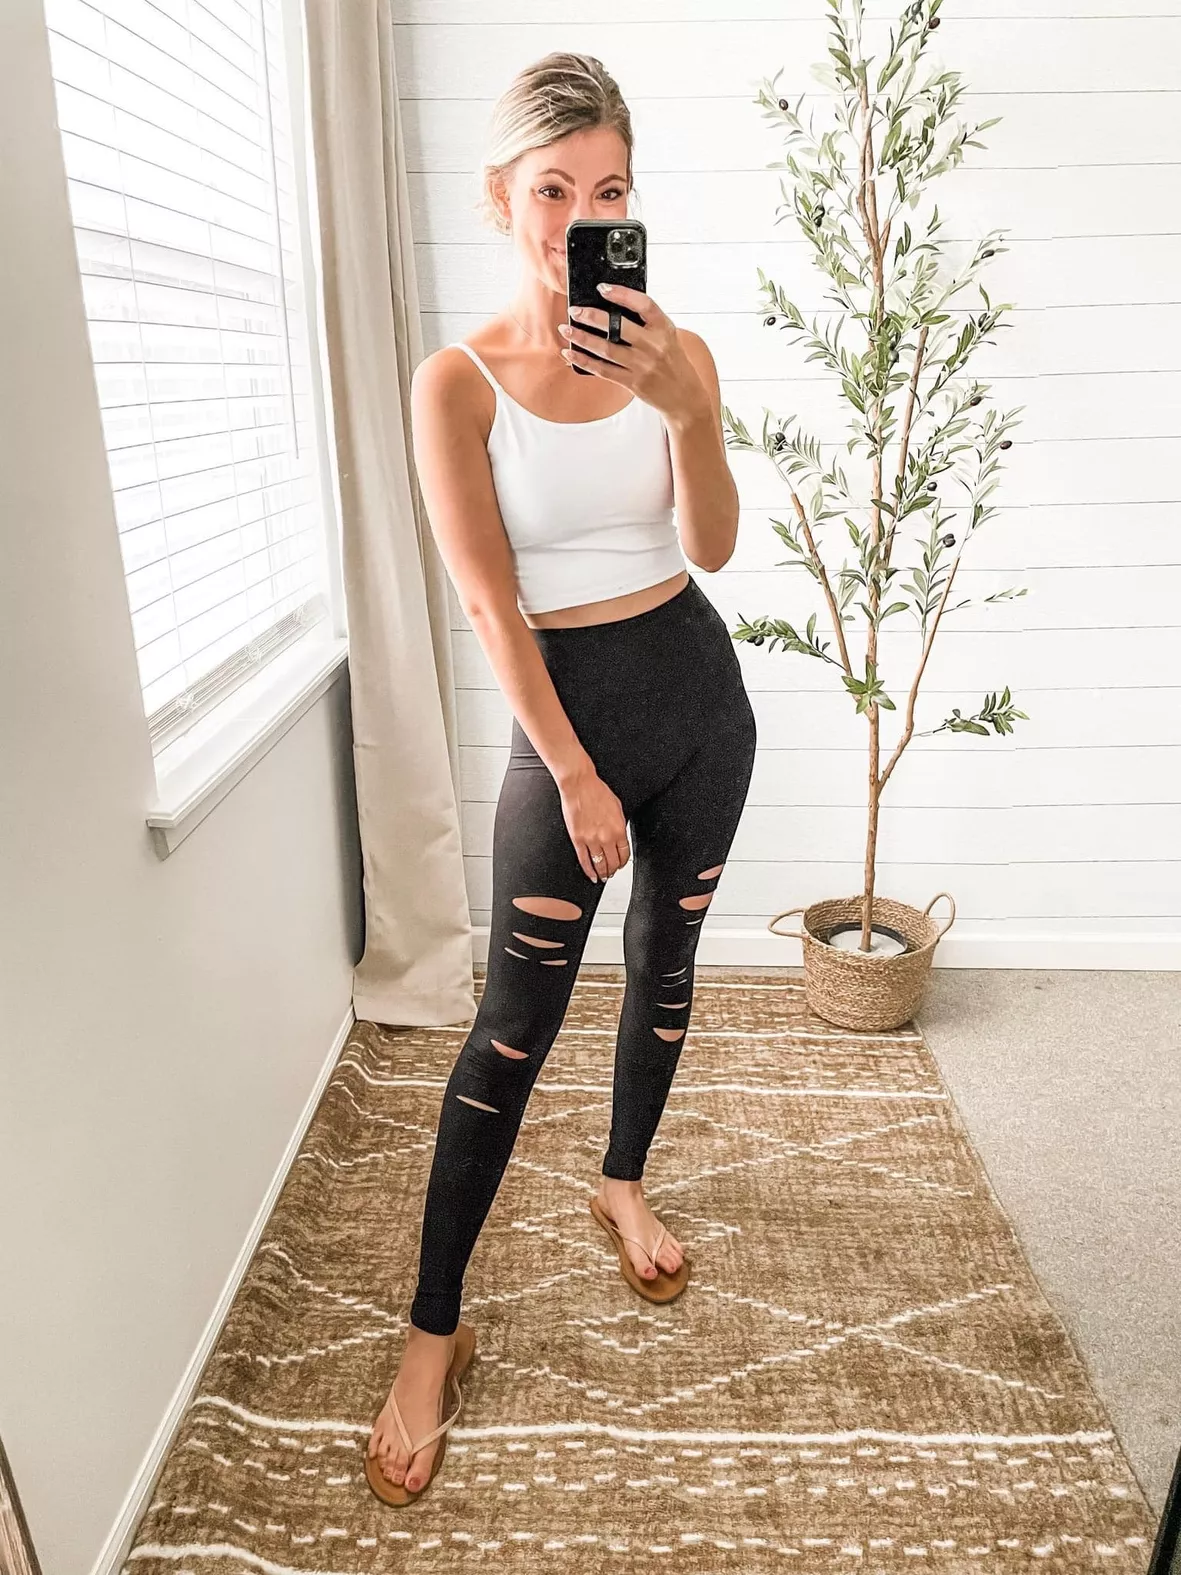 Let's Seize The Day Taupe Bra Top  High waisted black leggings, Bra tops,  Cute bras